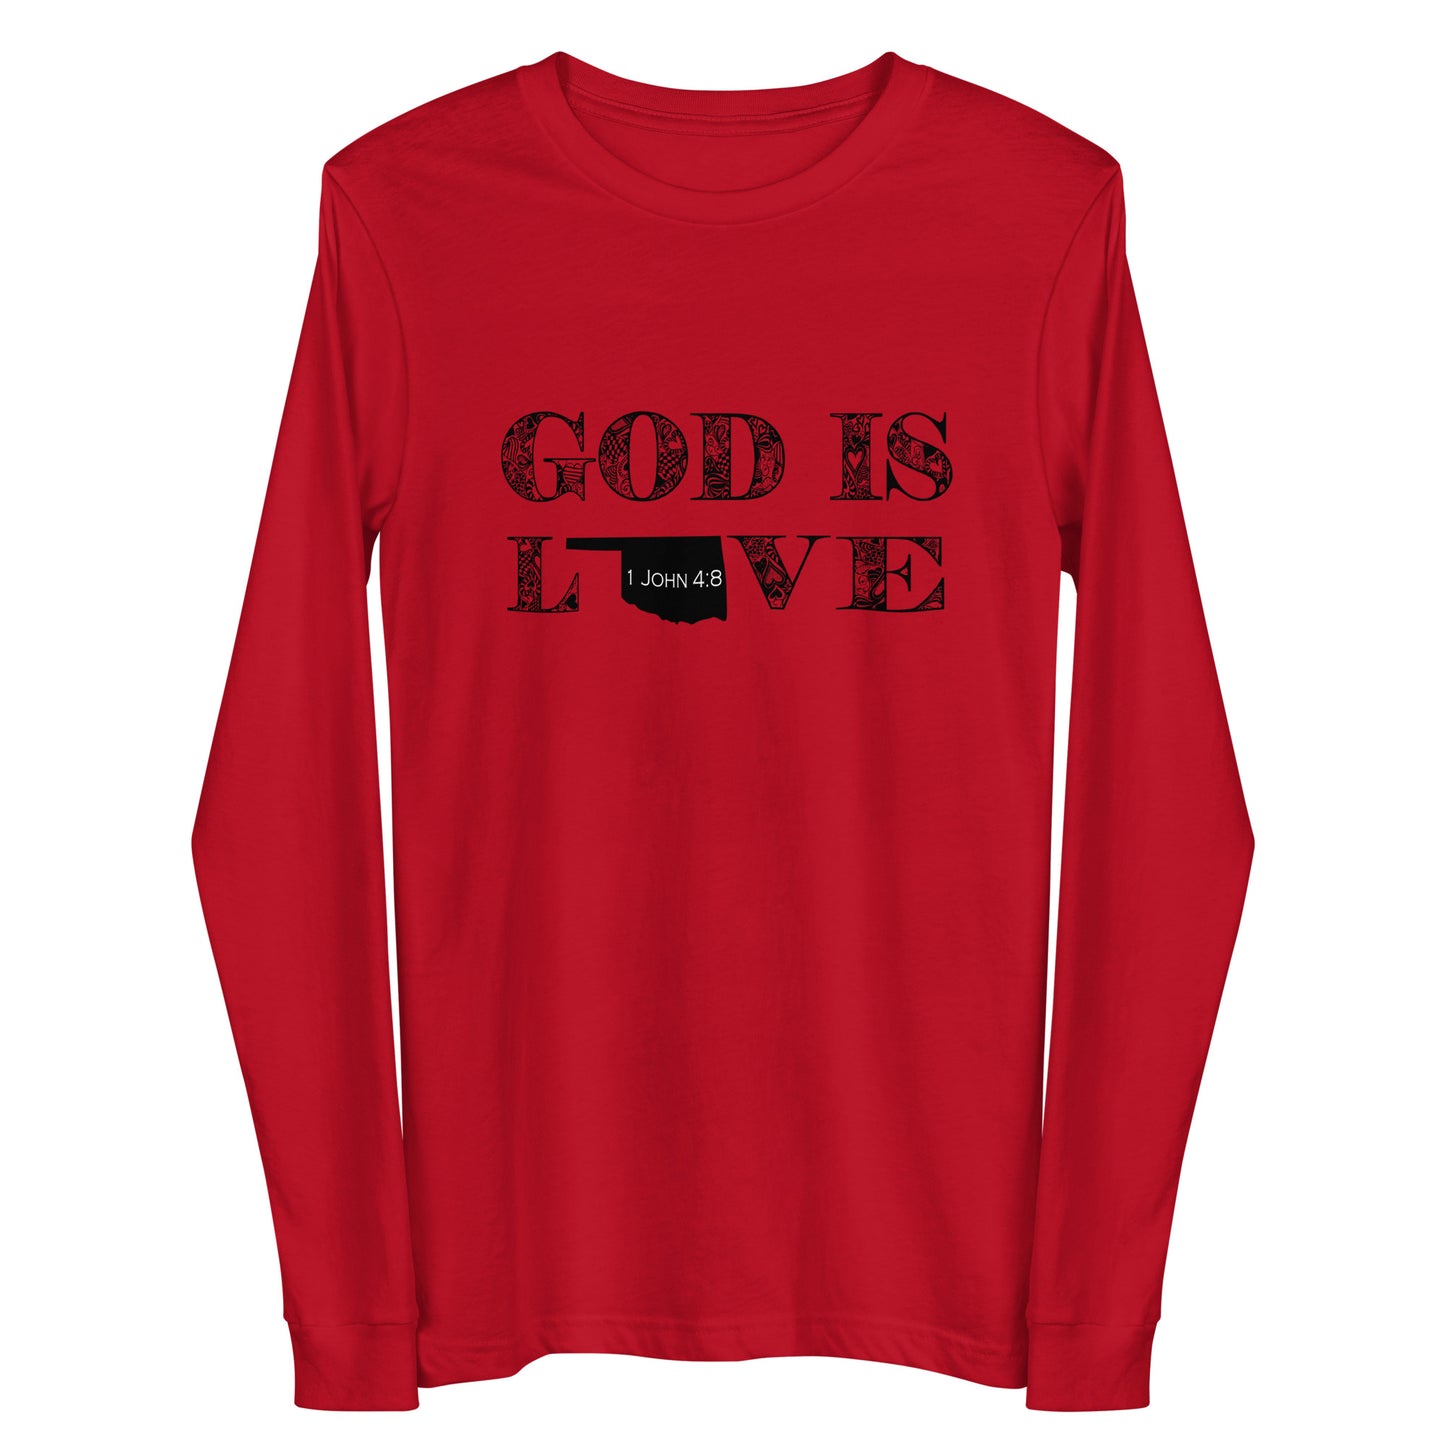 1 John 4:8 God is Love Unisex Long Sleeve Oklahoma Tee in Red - front view